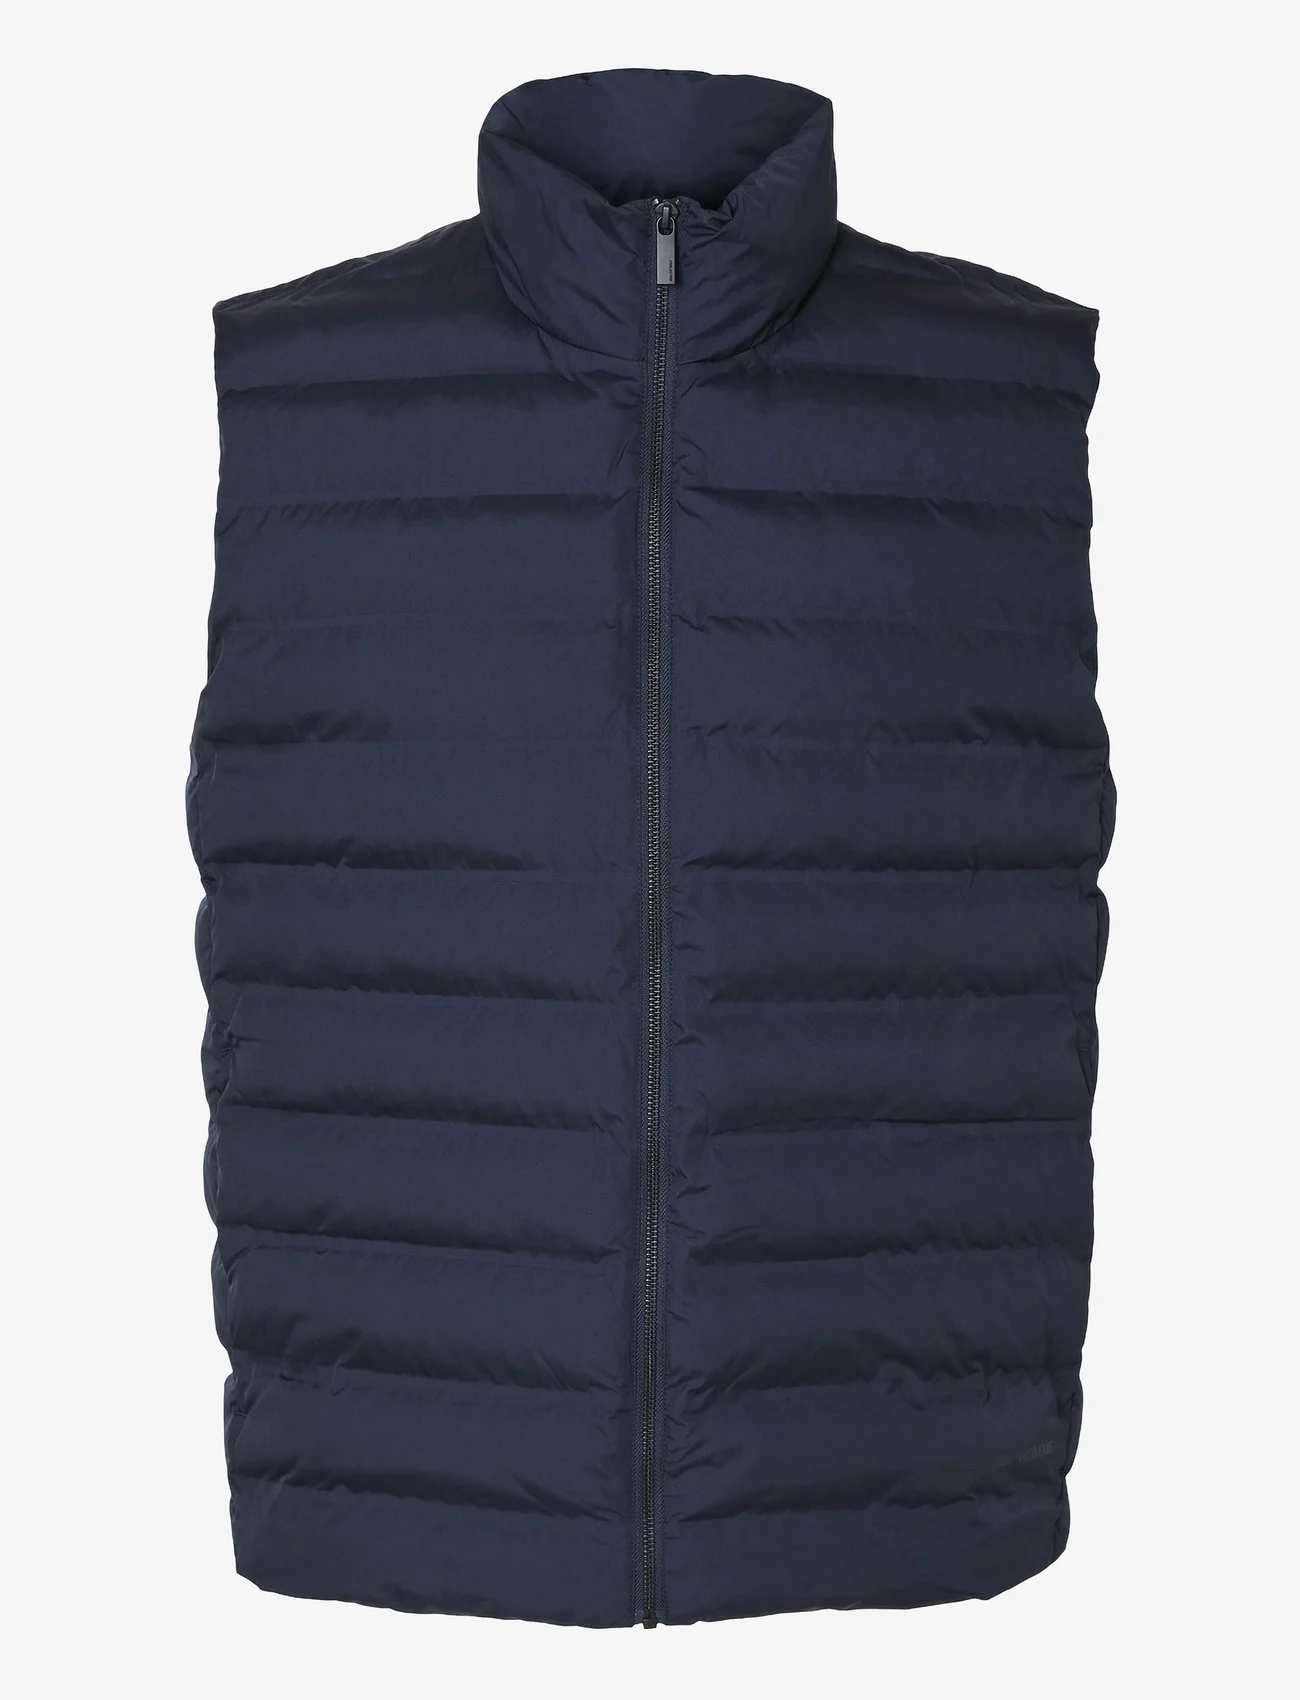 Selected Homme - SLHBARRY QUILTED GILET NOOS - westen - sky captain - 0